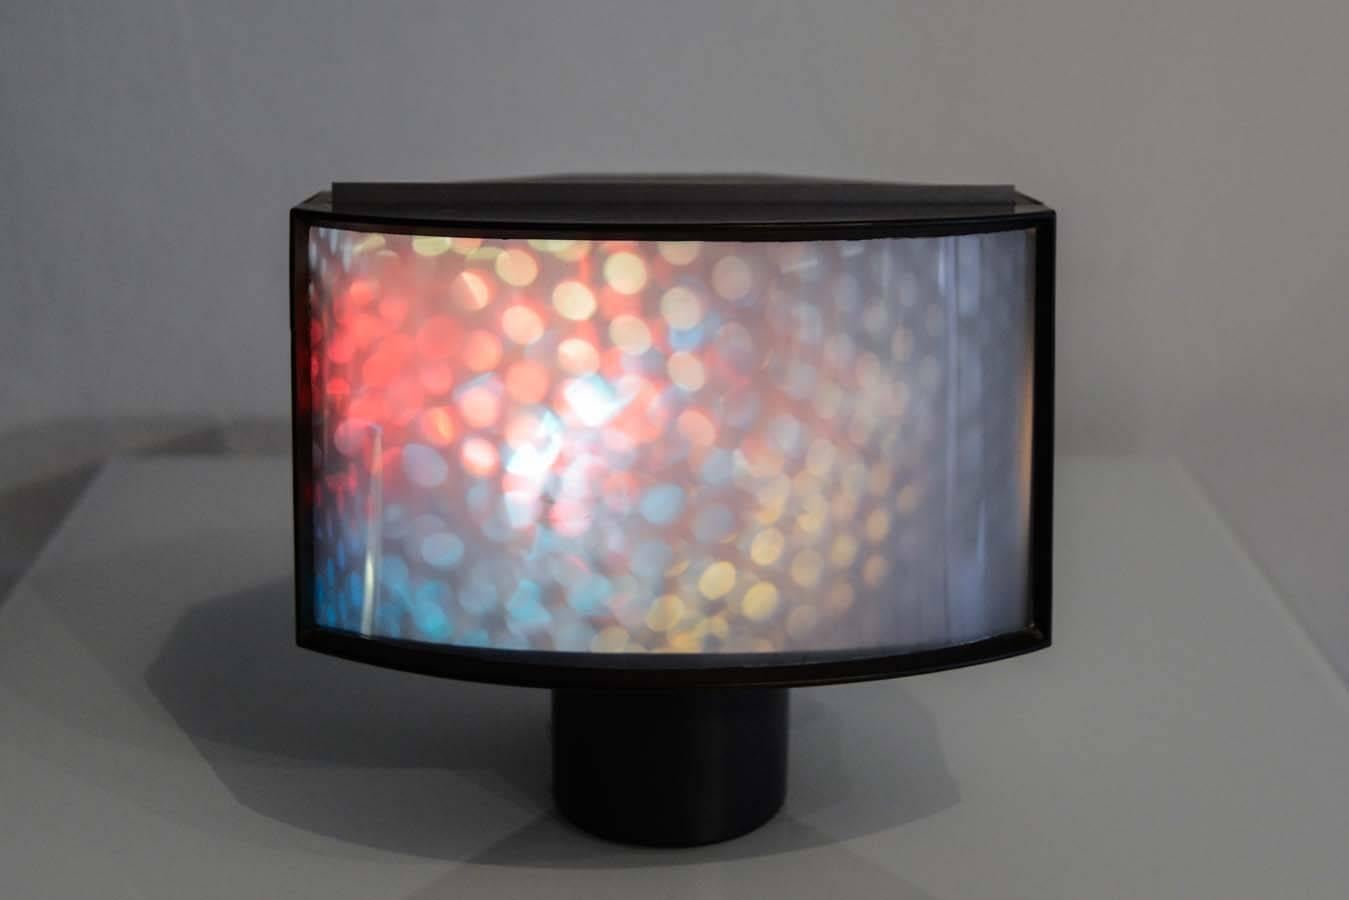 Nicolas Schöffer (1912-1992), 
Lumino, 1968. 
Plexiglass, lamp and electric motor.
A rare multiple by Schöffer that was produced by Philips. In prefect condition. A similar work was recently exhibited at the Prada Foundation in Venice as part of